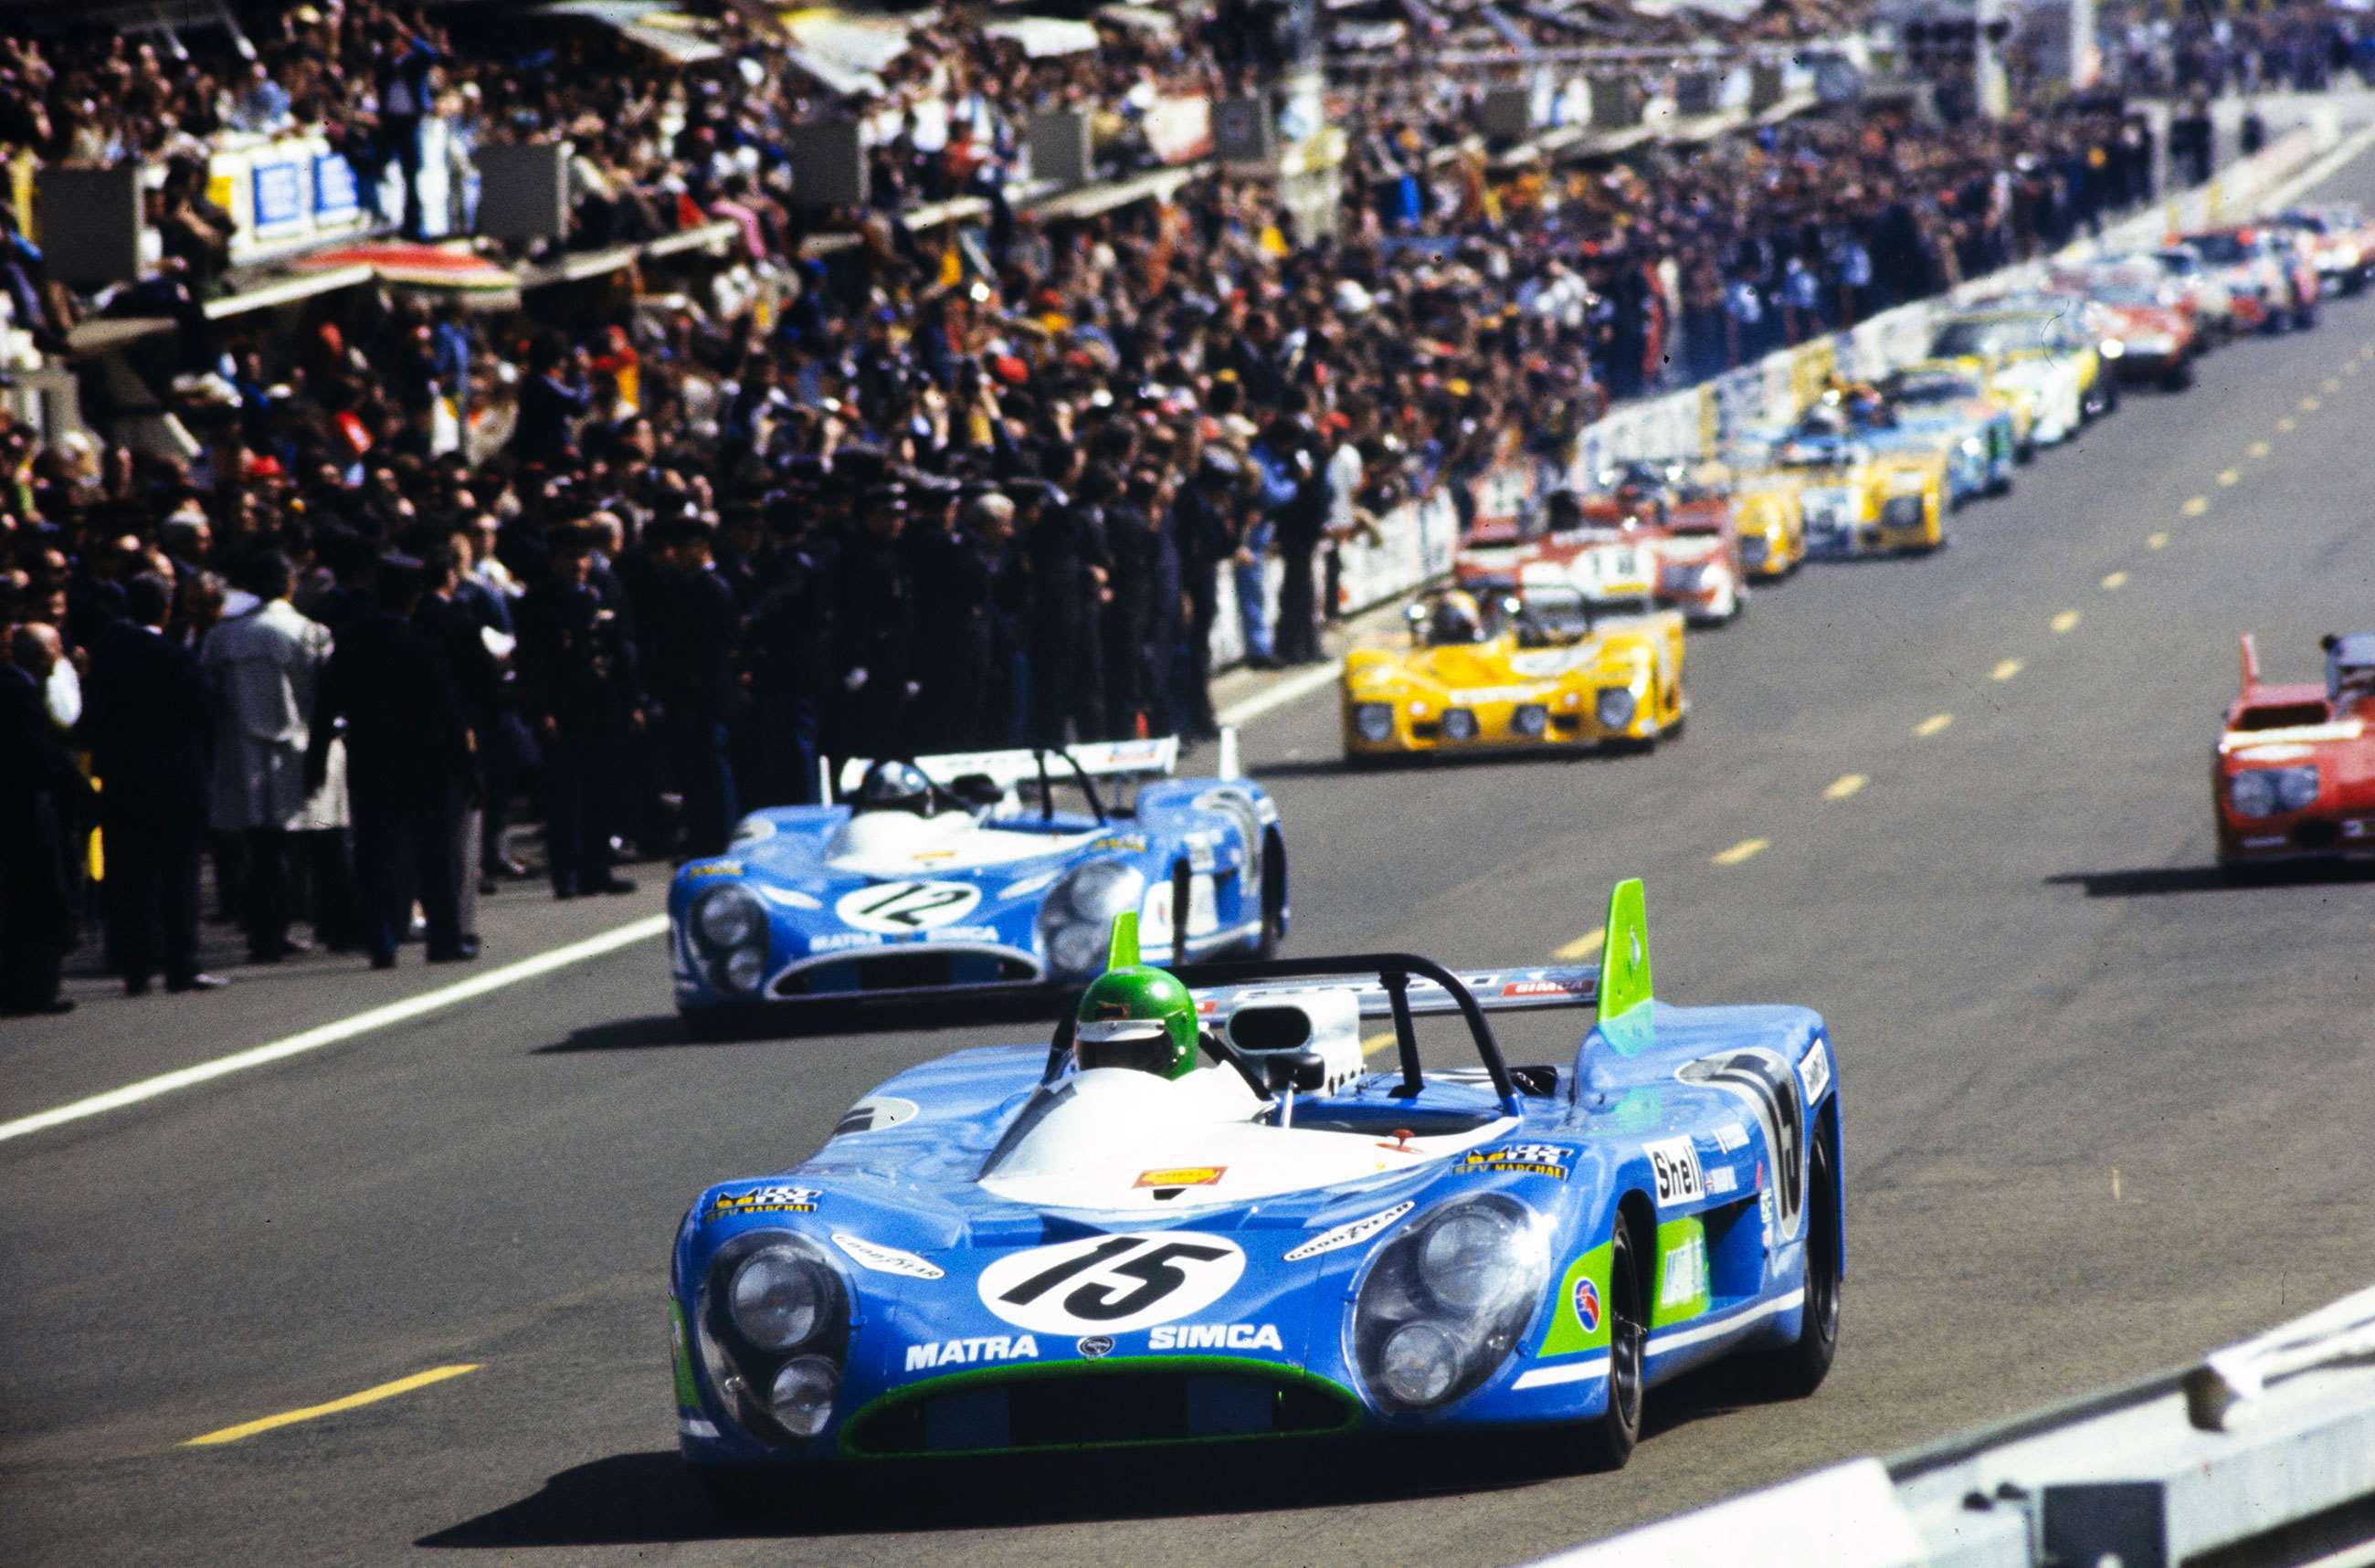 most-expensive-cars-sold-2021-7-matra-ms670-graham-hill-le-mans-1972-mi-05012022.jpg